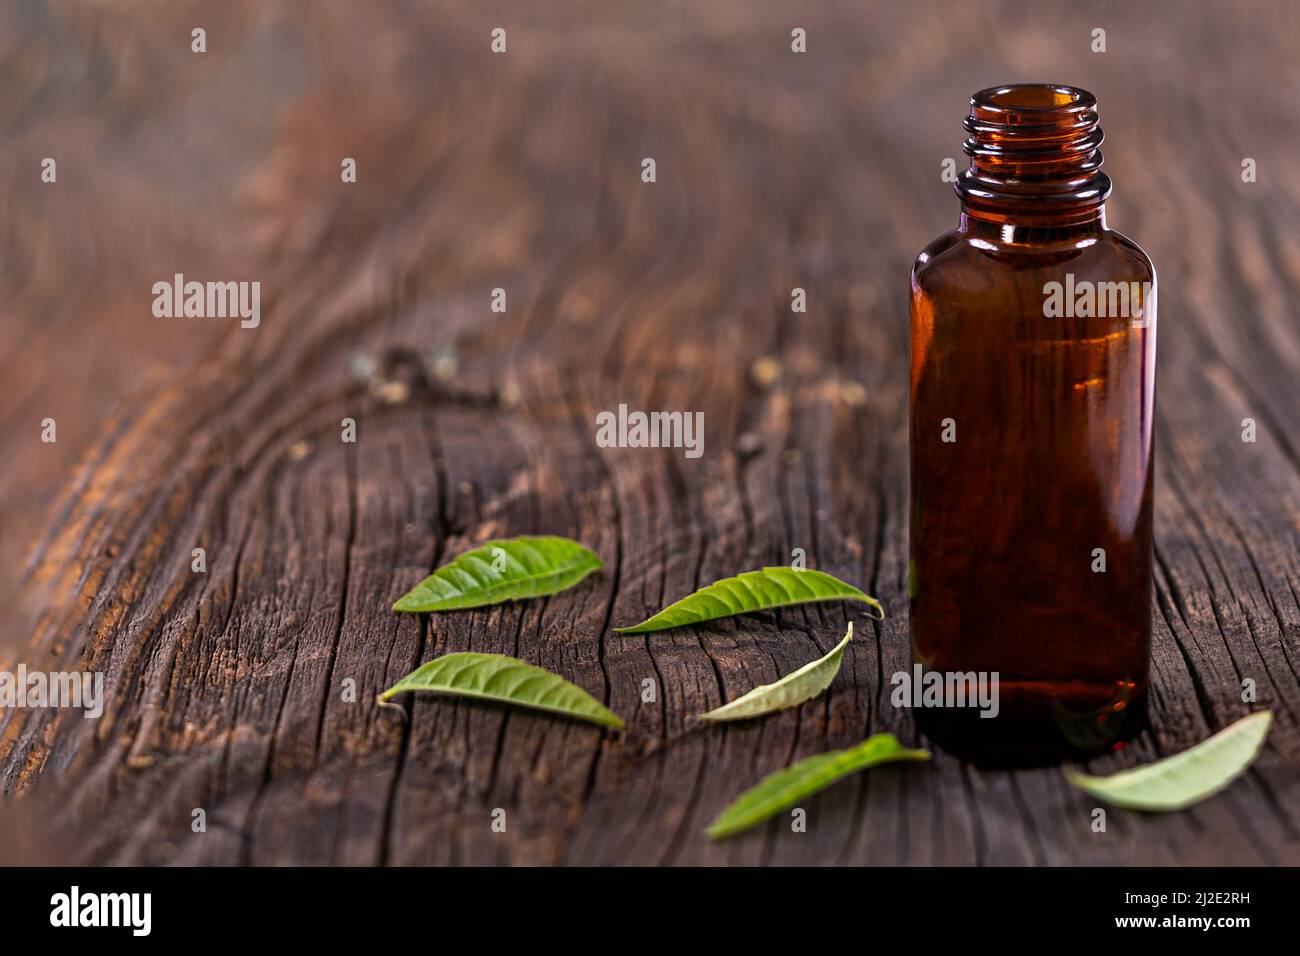 Lemon verbena essential oil bpttle and leaves on the wooden board. glass, fresh Stock Photo